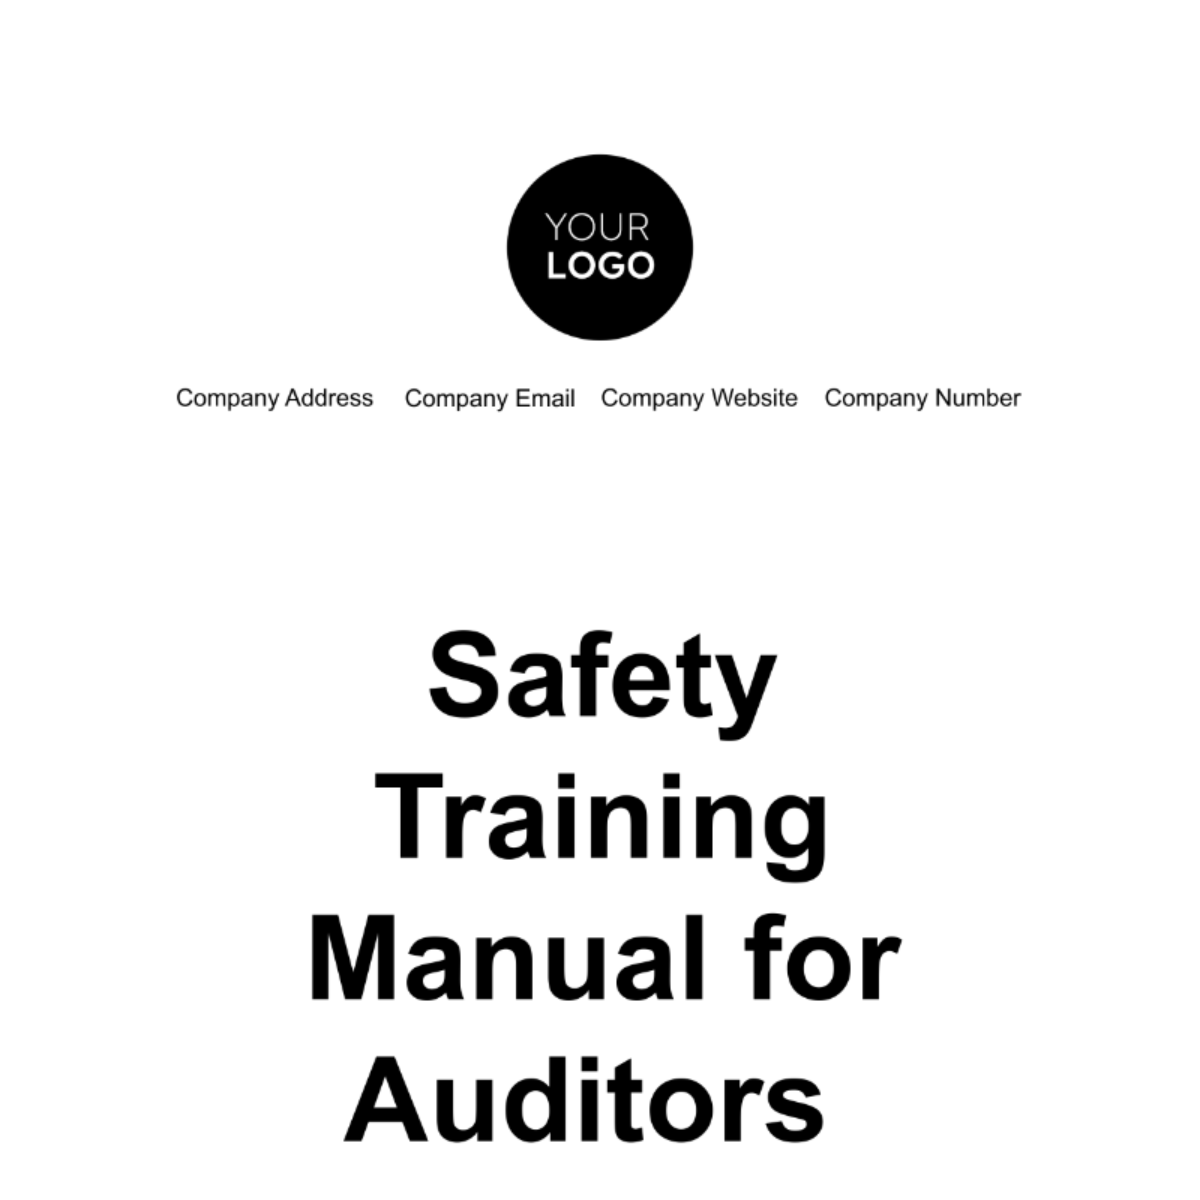 Safety Training Manual for Auditors Template